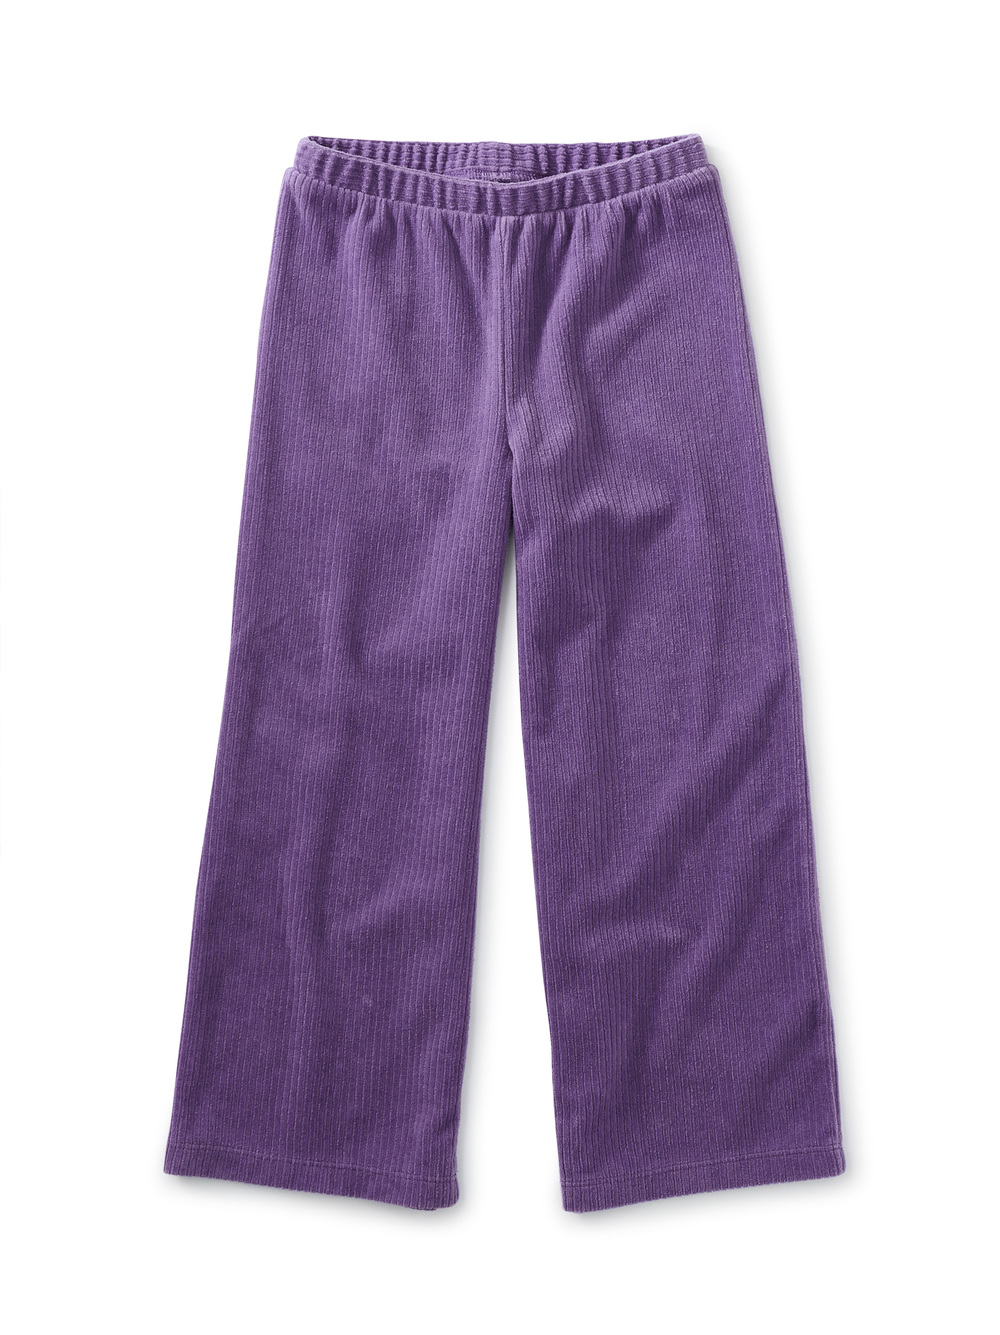 Flare for Fun Velour Pants